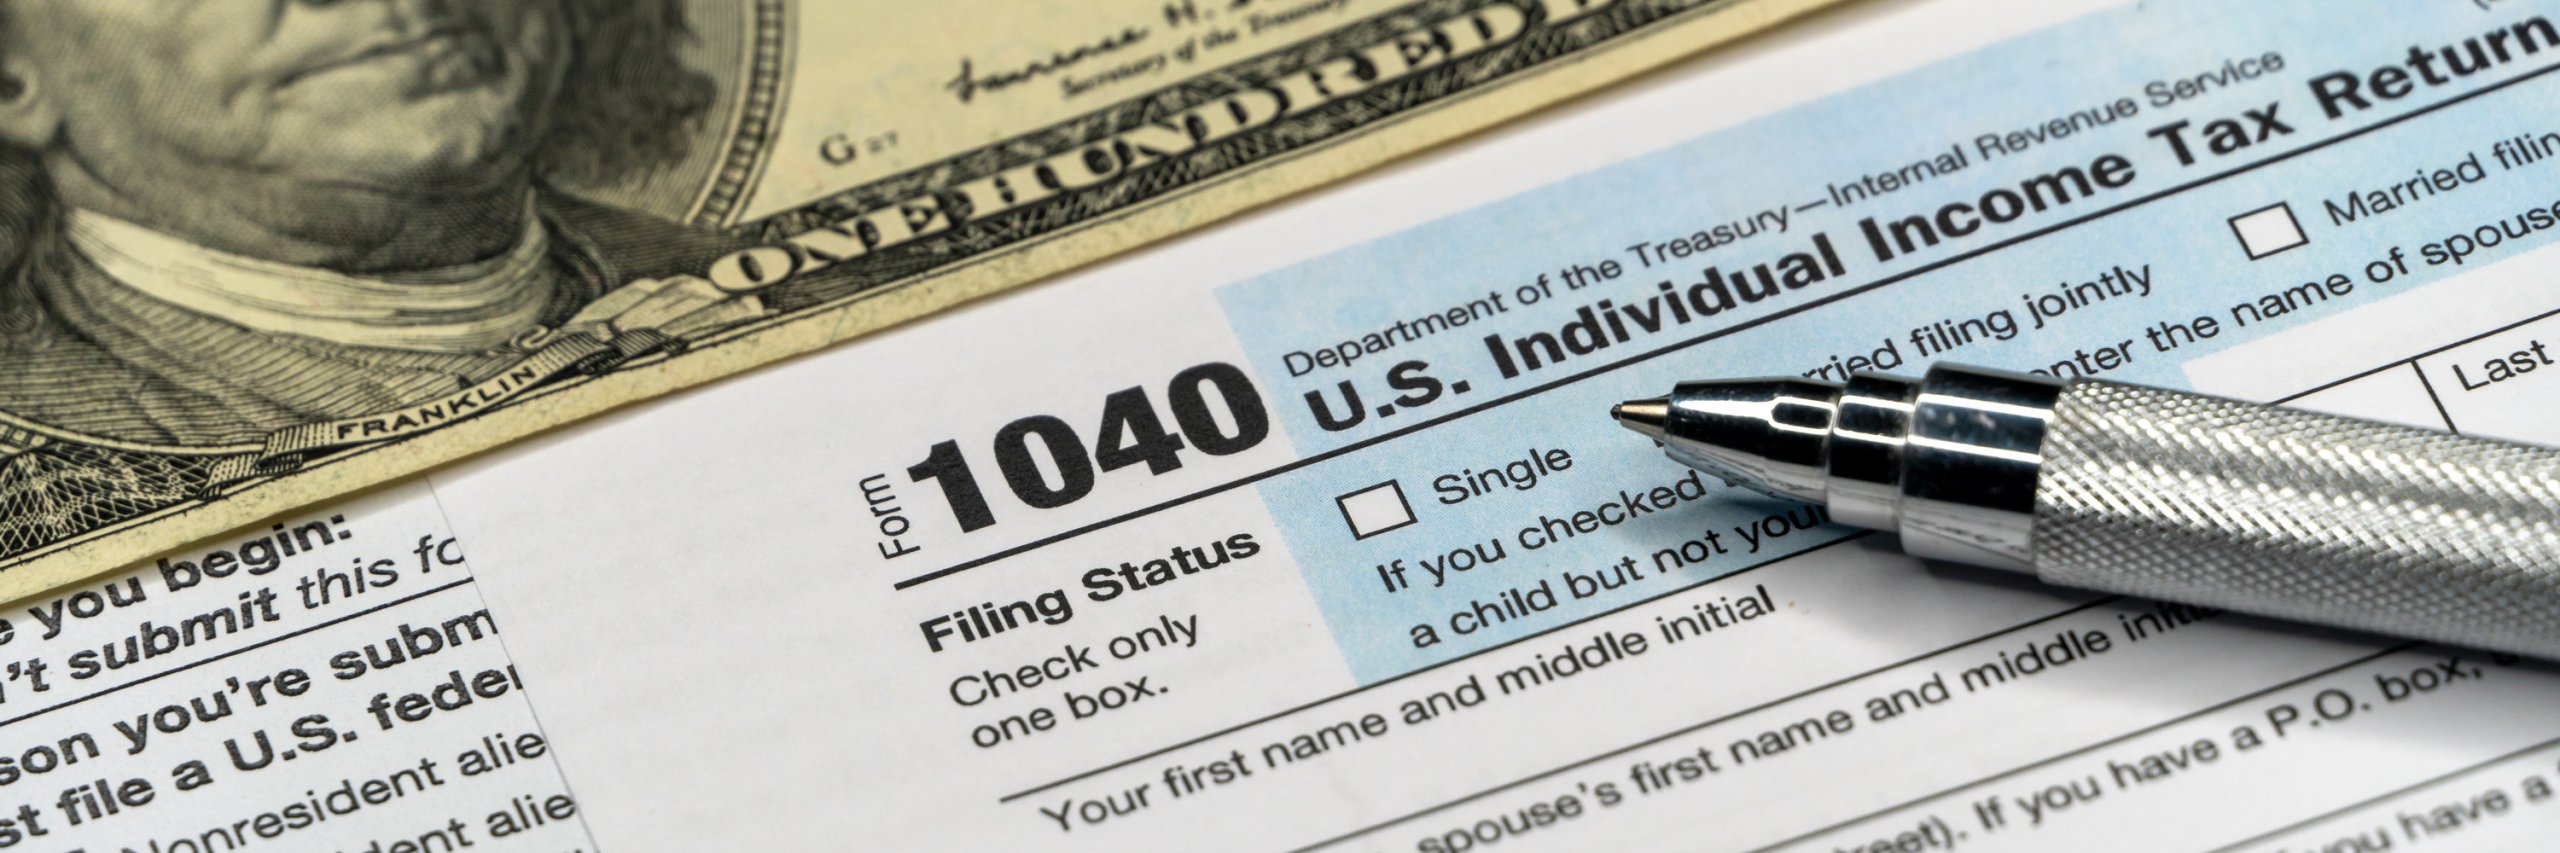 6 Things Everyone Should Know About Taxes